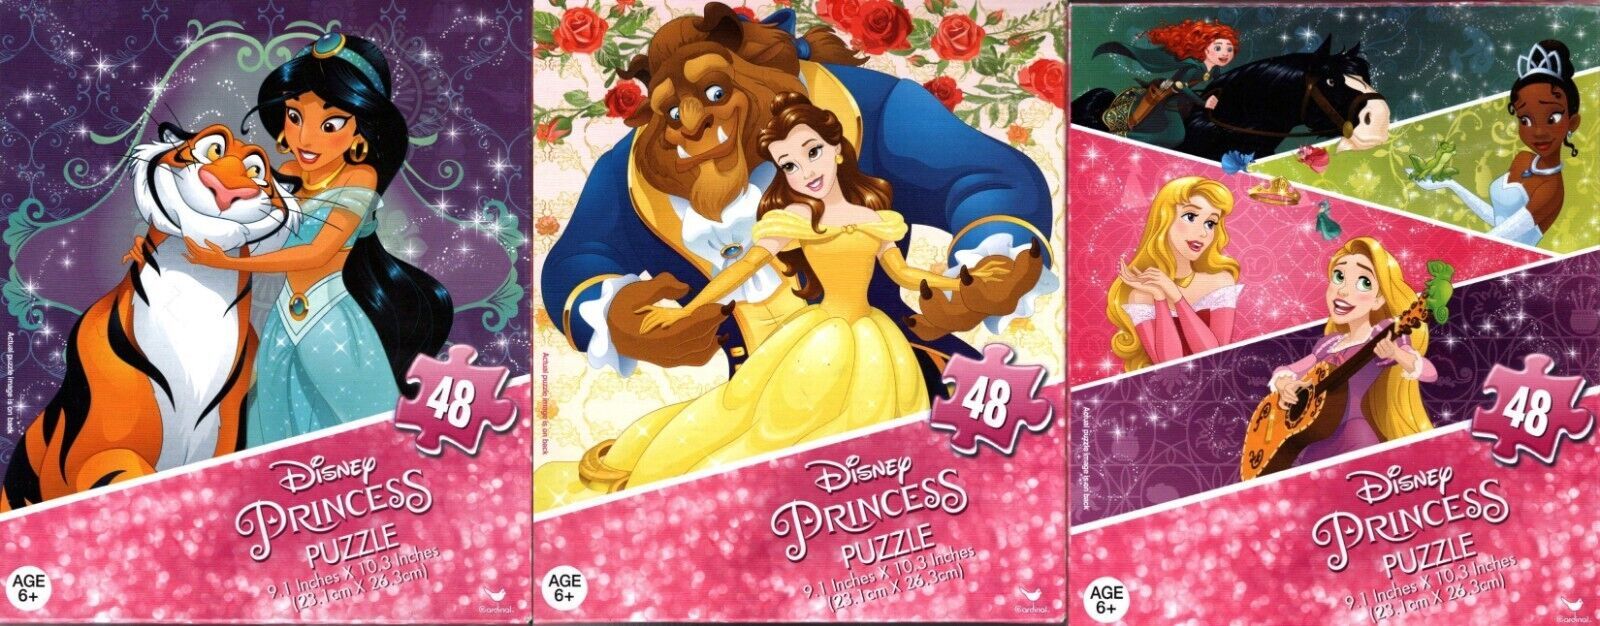 Primary image for Disney Princess - 48 Pieces Jigsaw Puzzle Set of 3